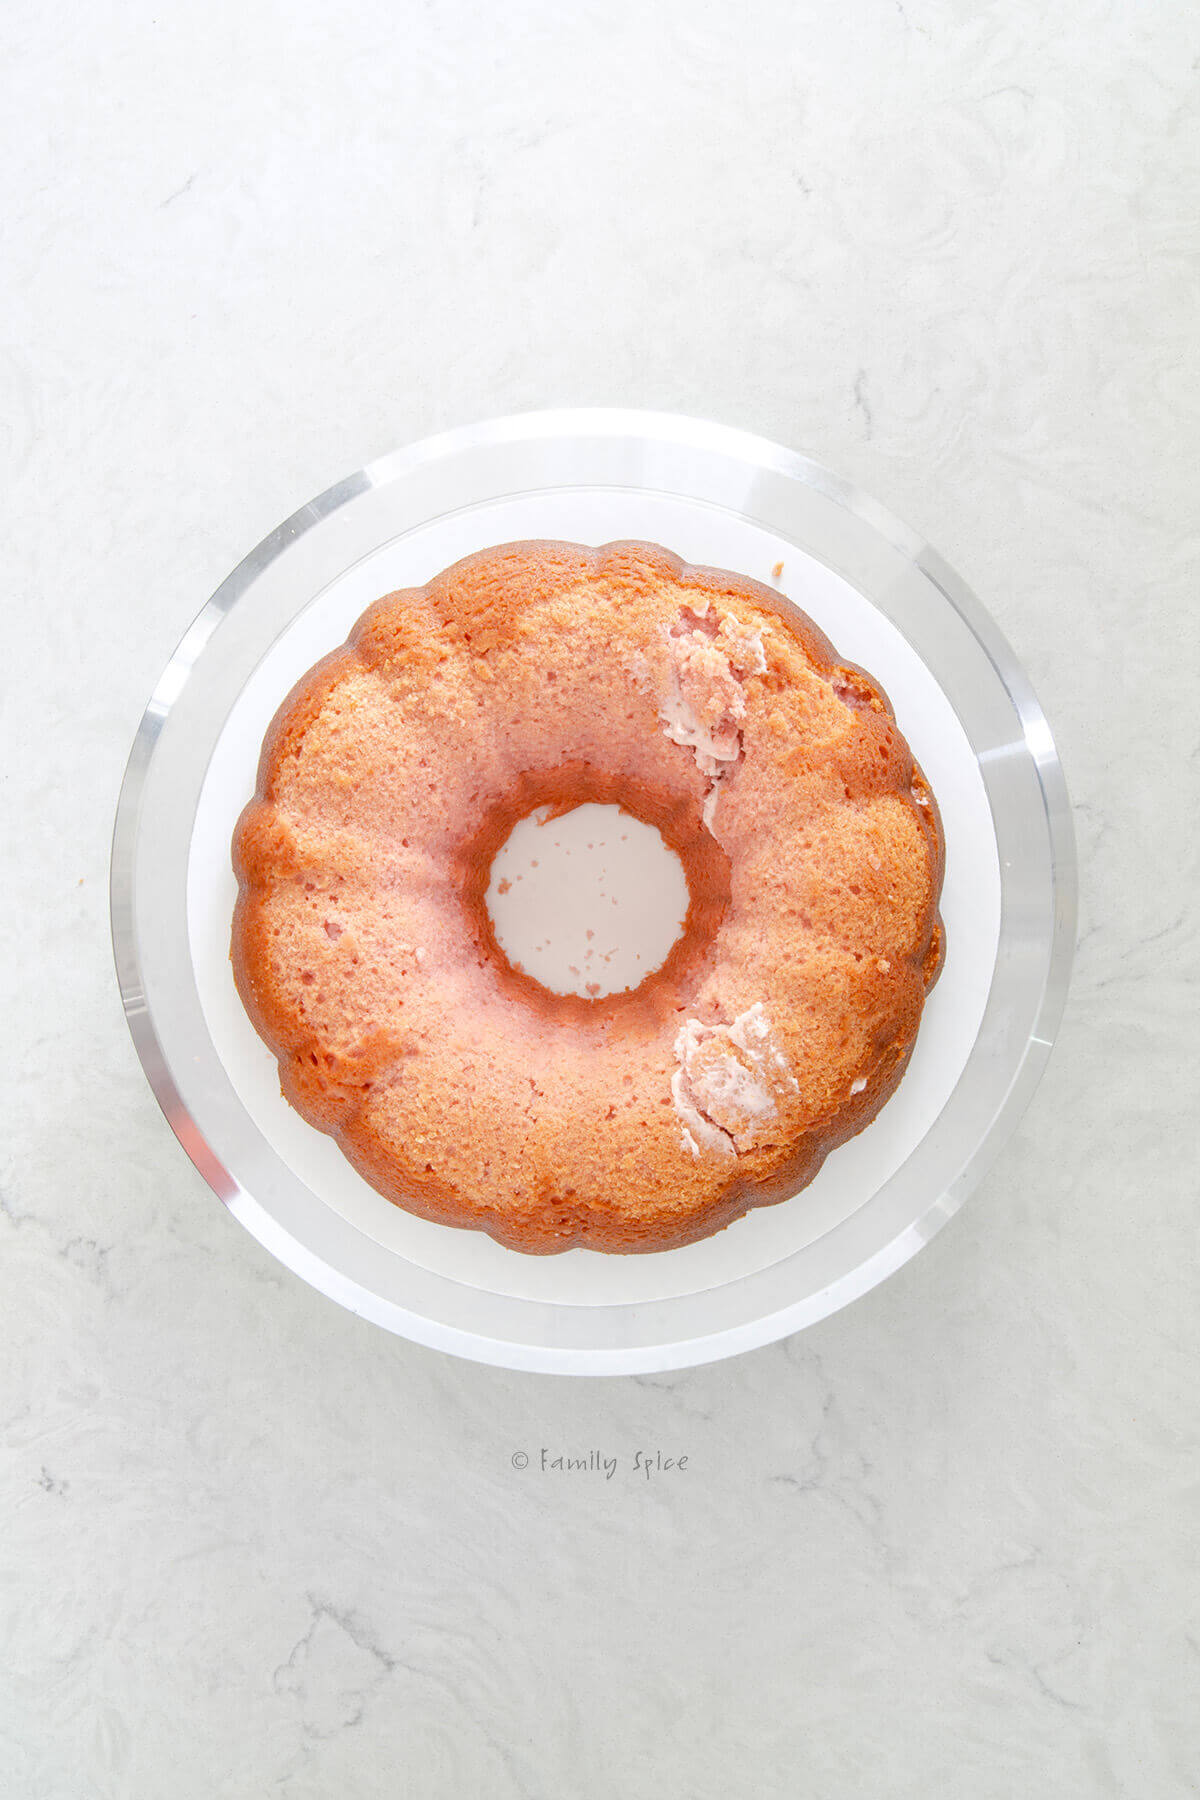 Top view of a pink strawberry bundt cake on a metal cake stand